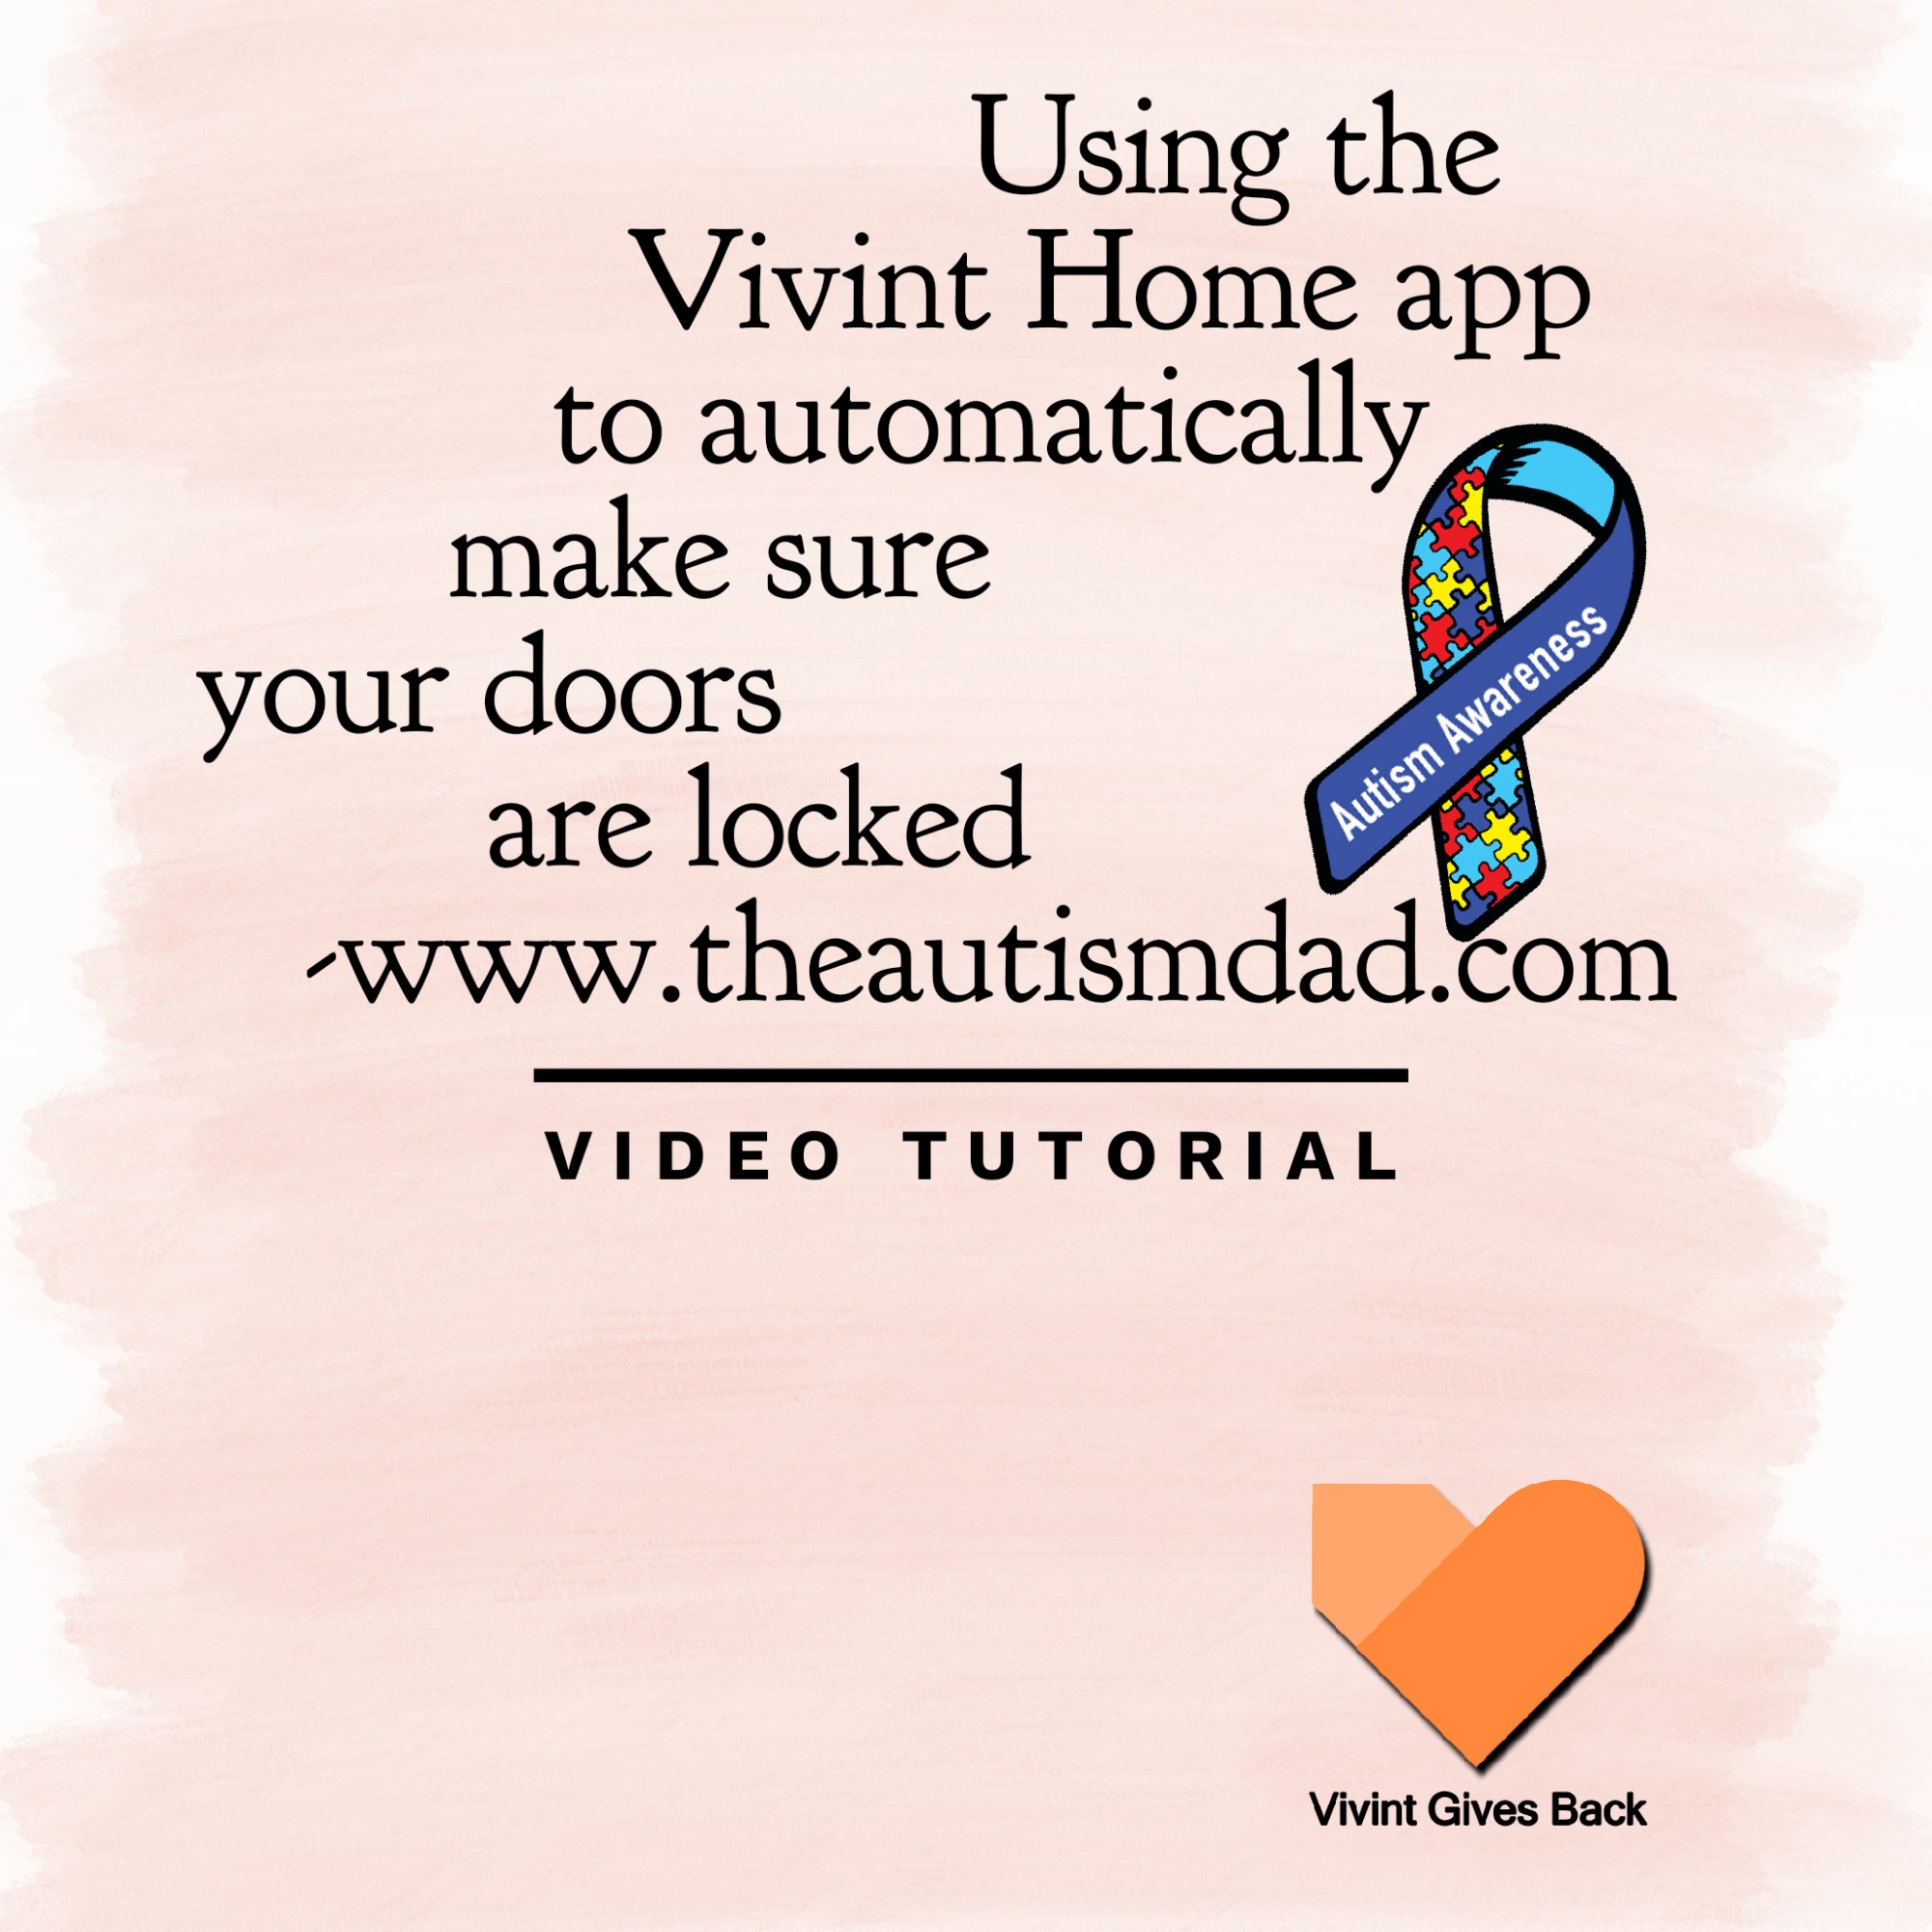 Using the @VivintHome app to automatically make sure your doors are locked